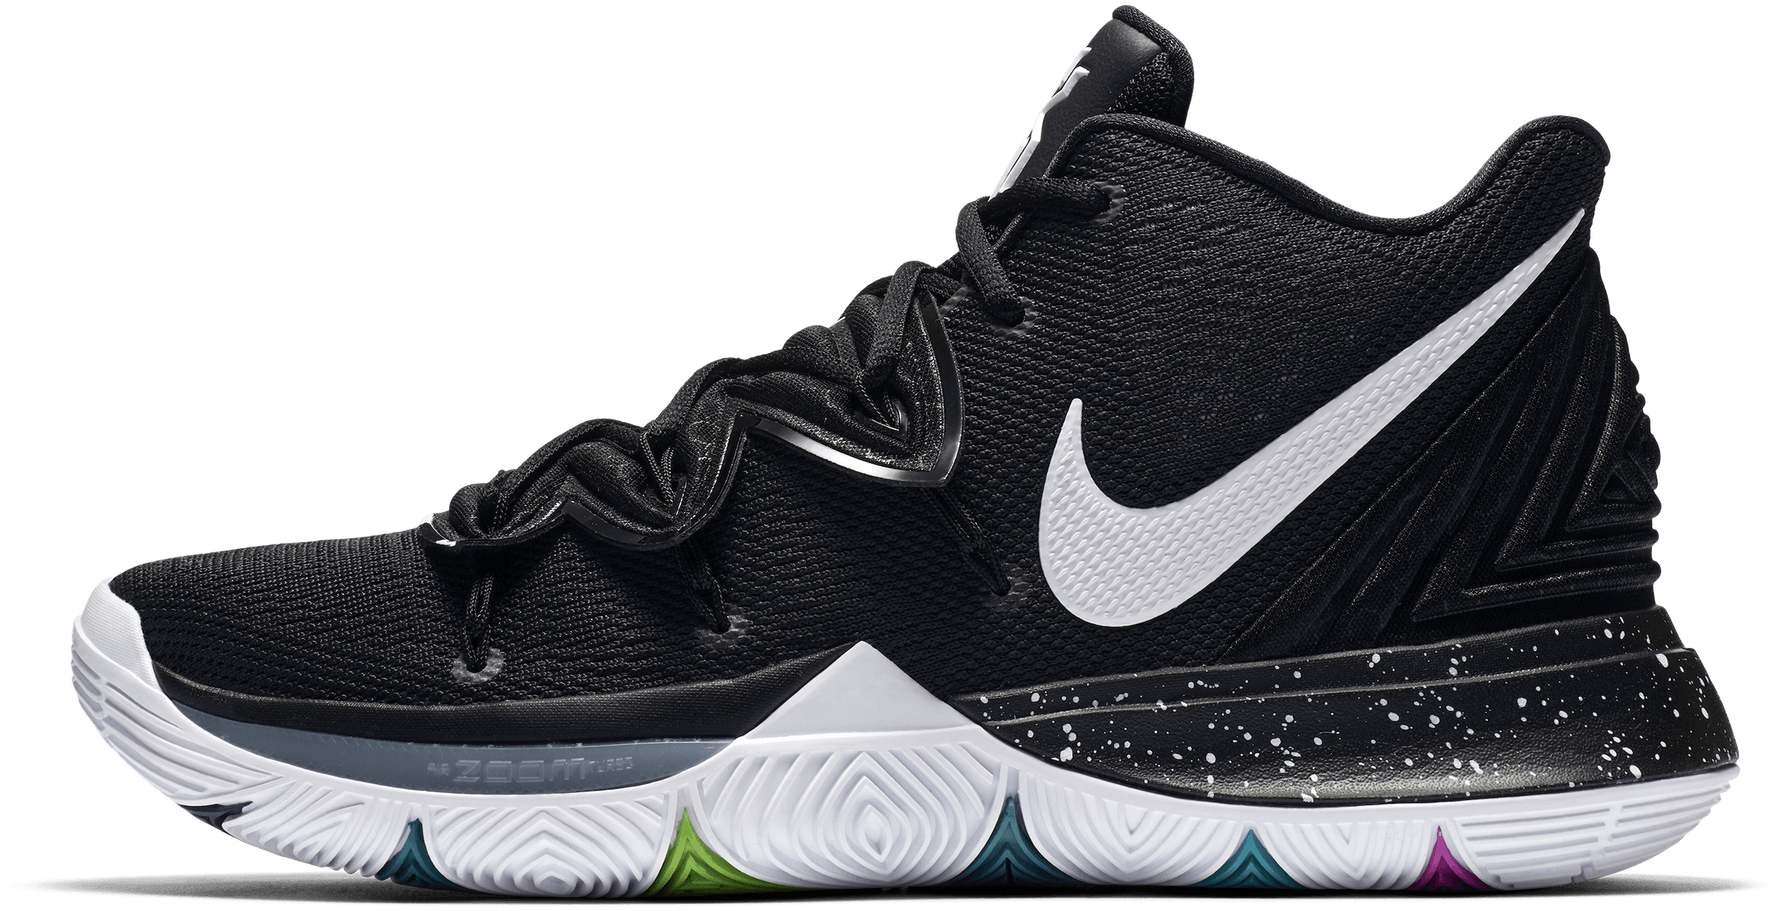 kyrie 5 size fit